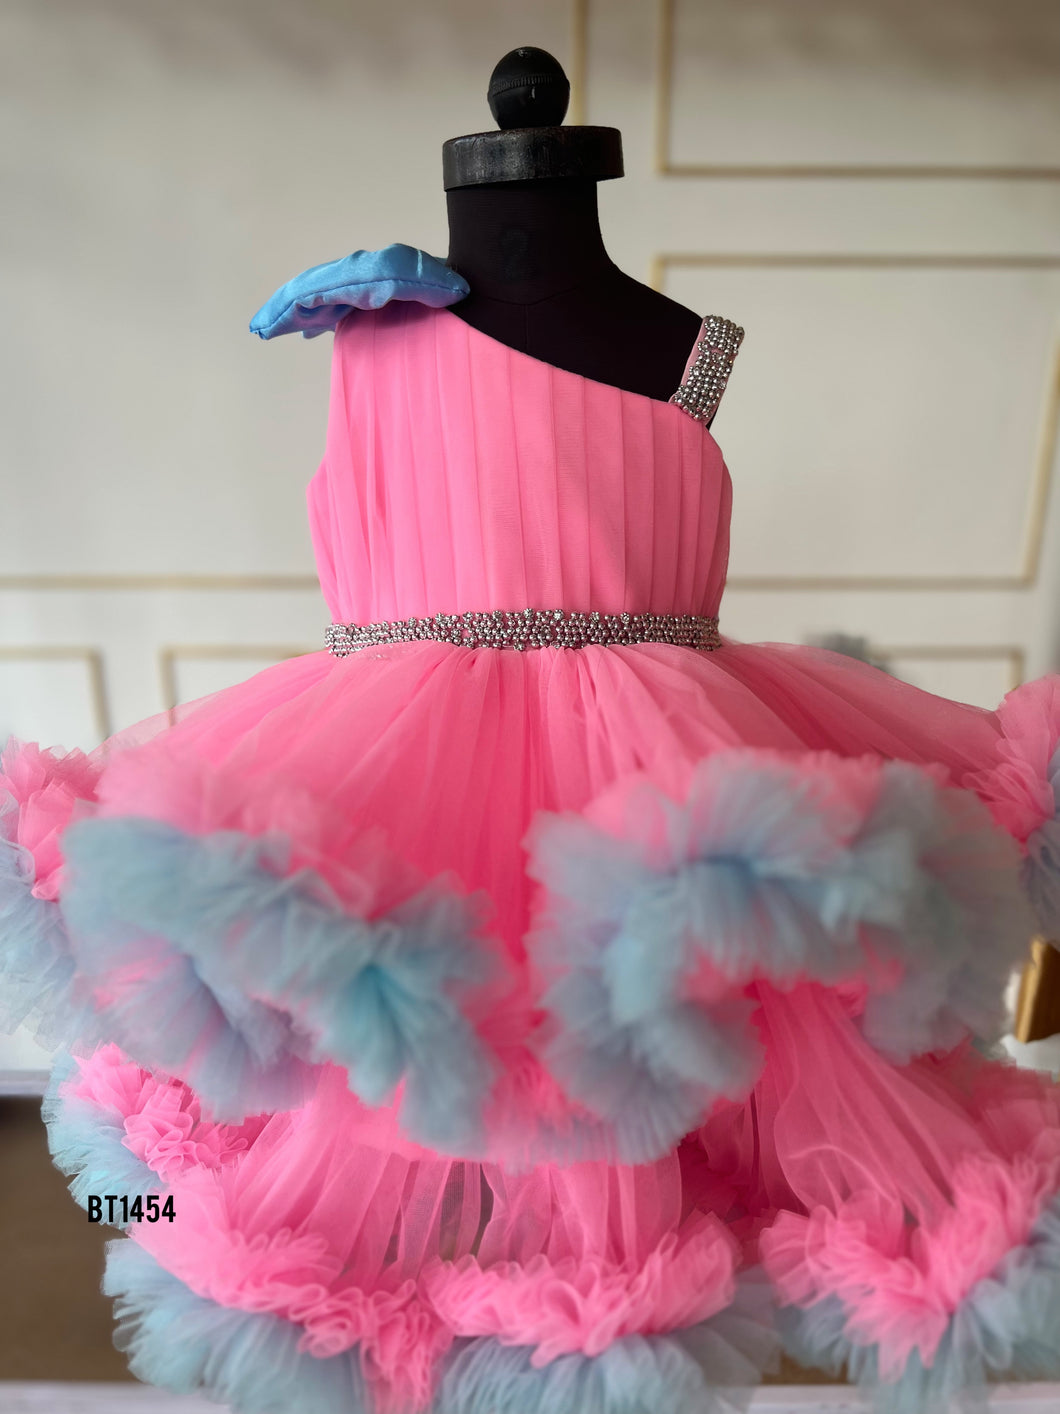 BT1454 Cotton Candy Dream: A Whimsical Pink and Blue Tulle Dress